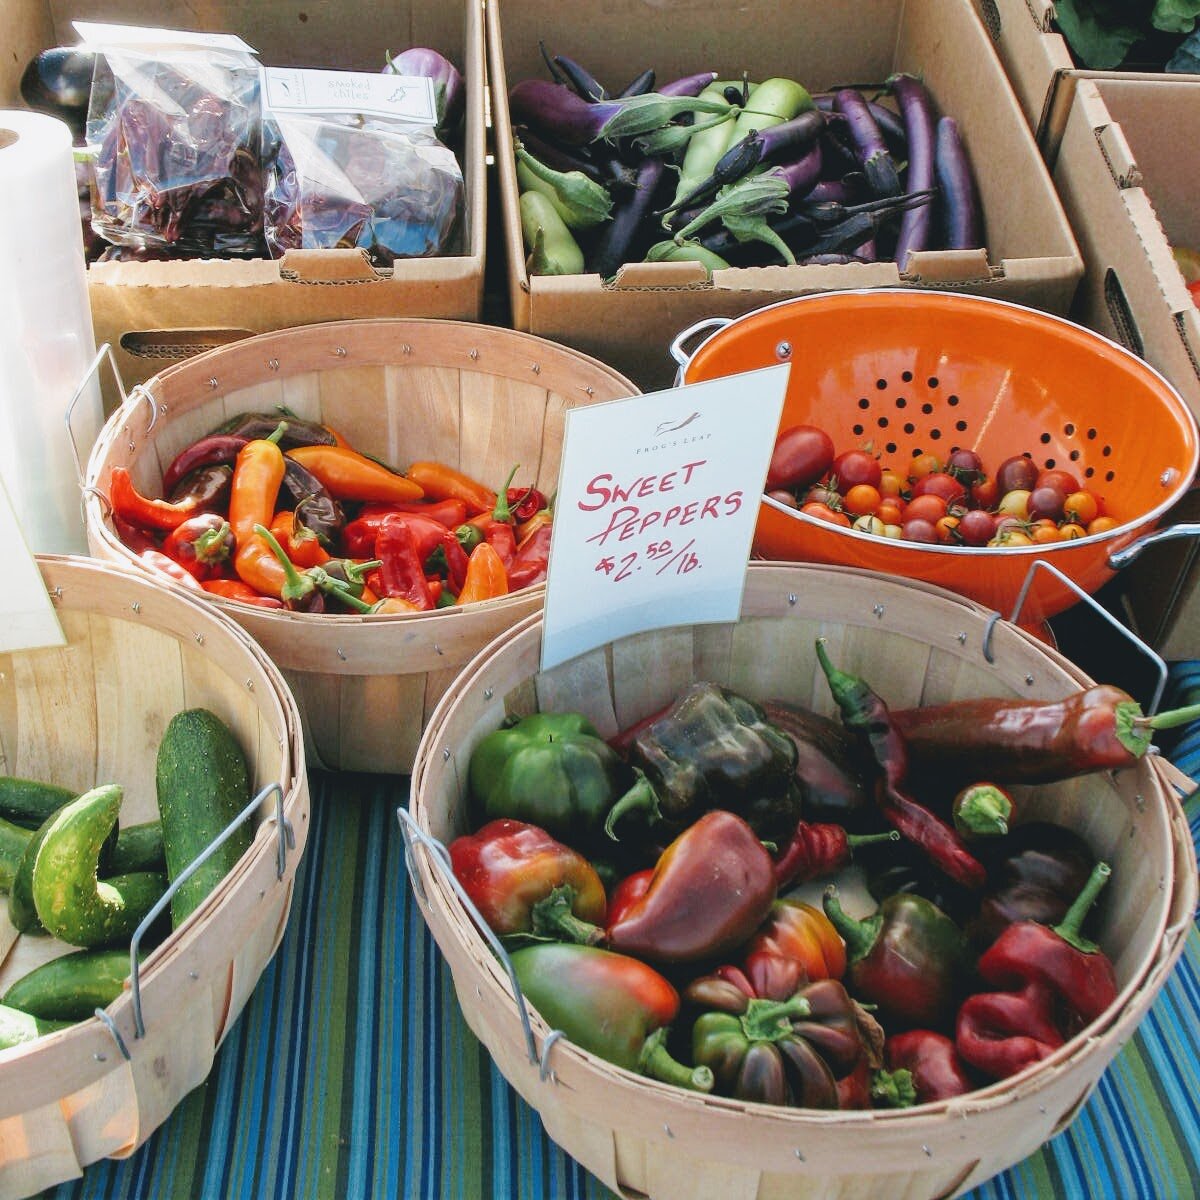  Tomatoes, peppers, cucumbers and eggplant…late summer’s flavors and colors. 